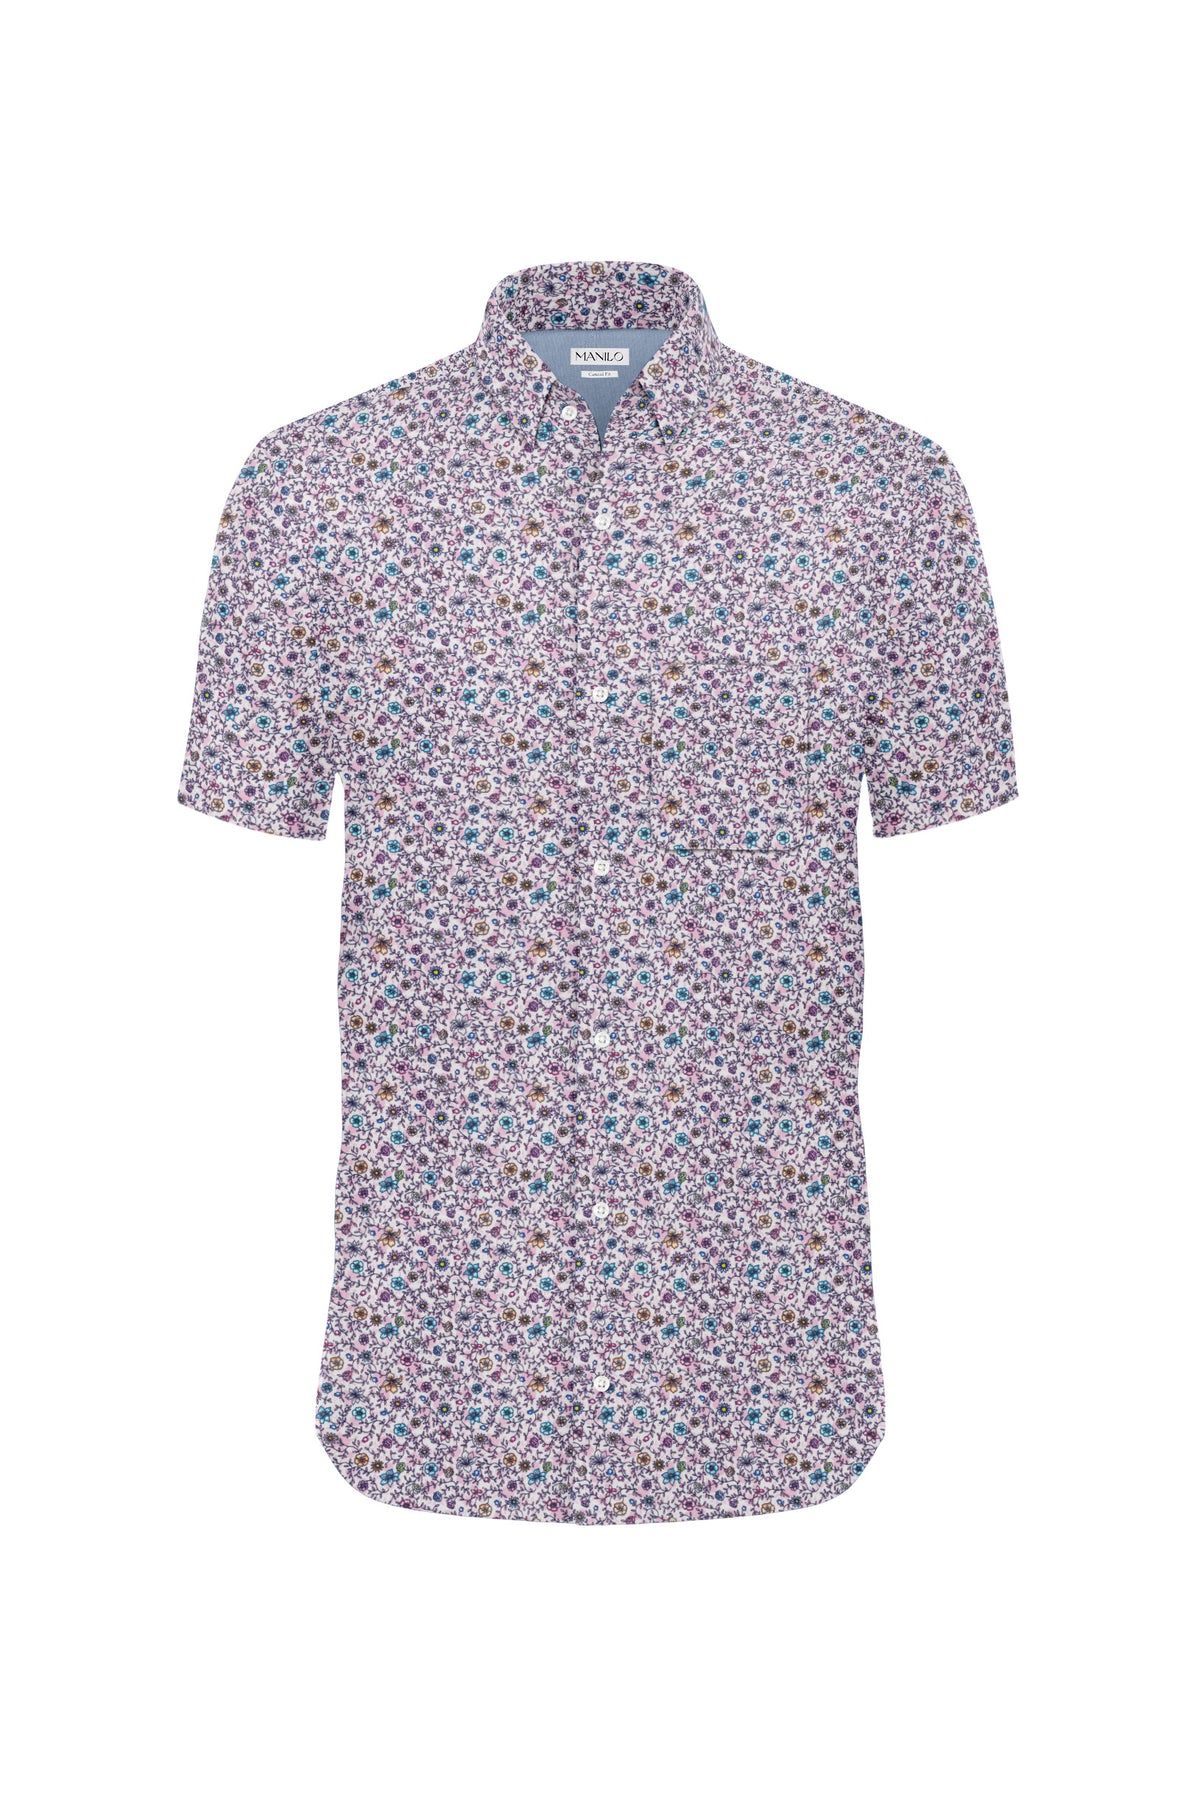 Casual shirt with floral pattern in pink (Art. 2225-C)